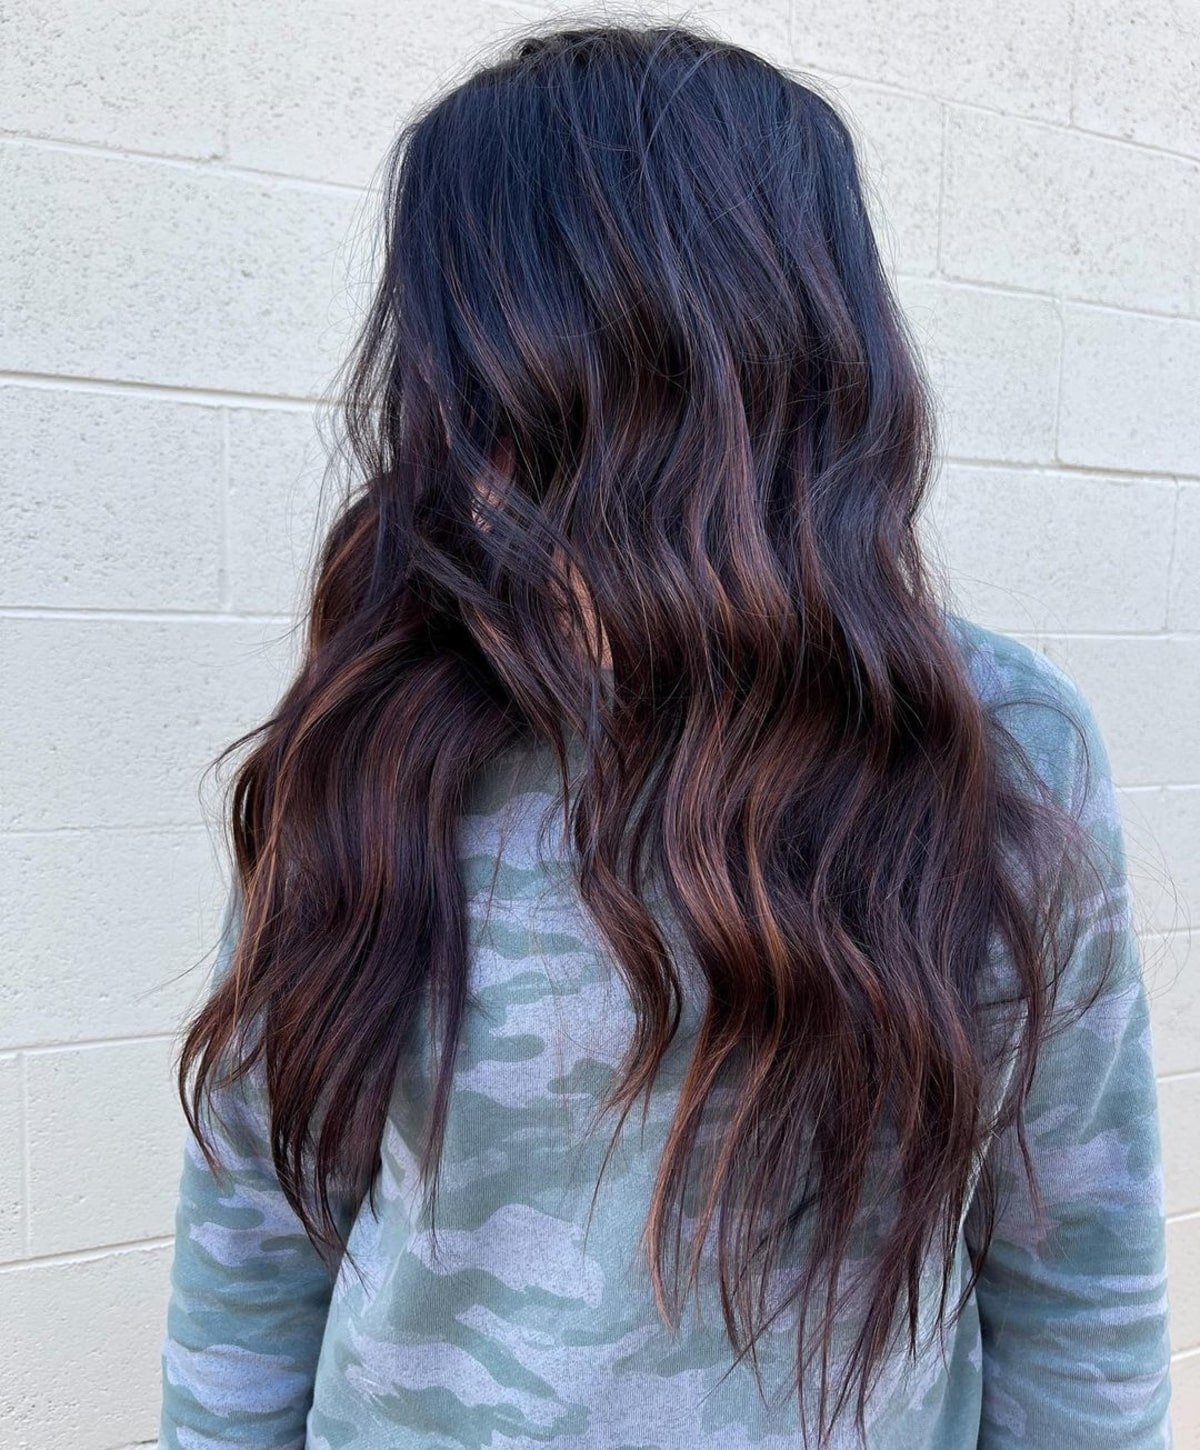 32 Trending Ways To Combine Dark Brown Hair with Caramel Highlights